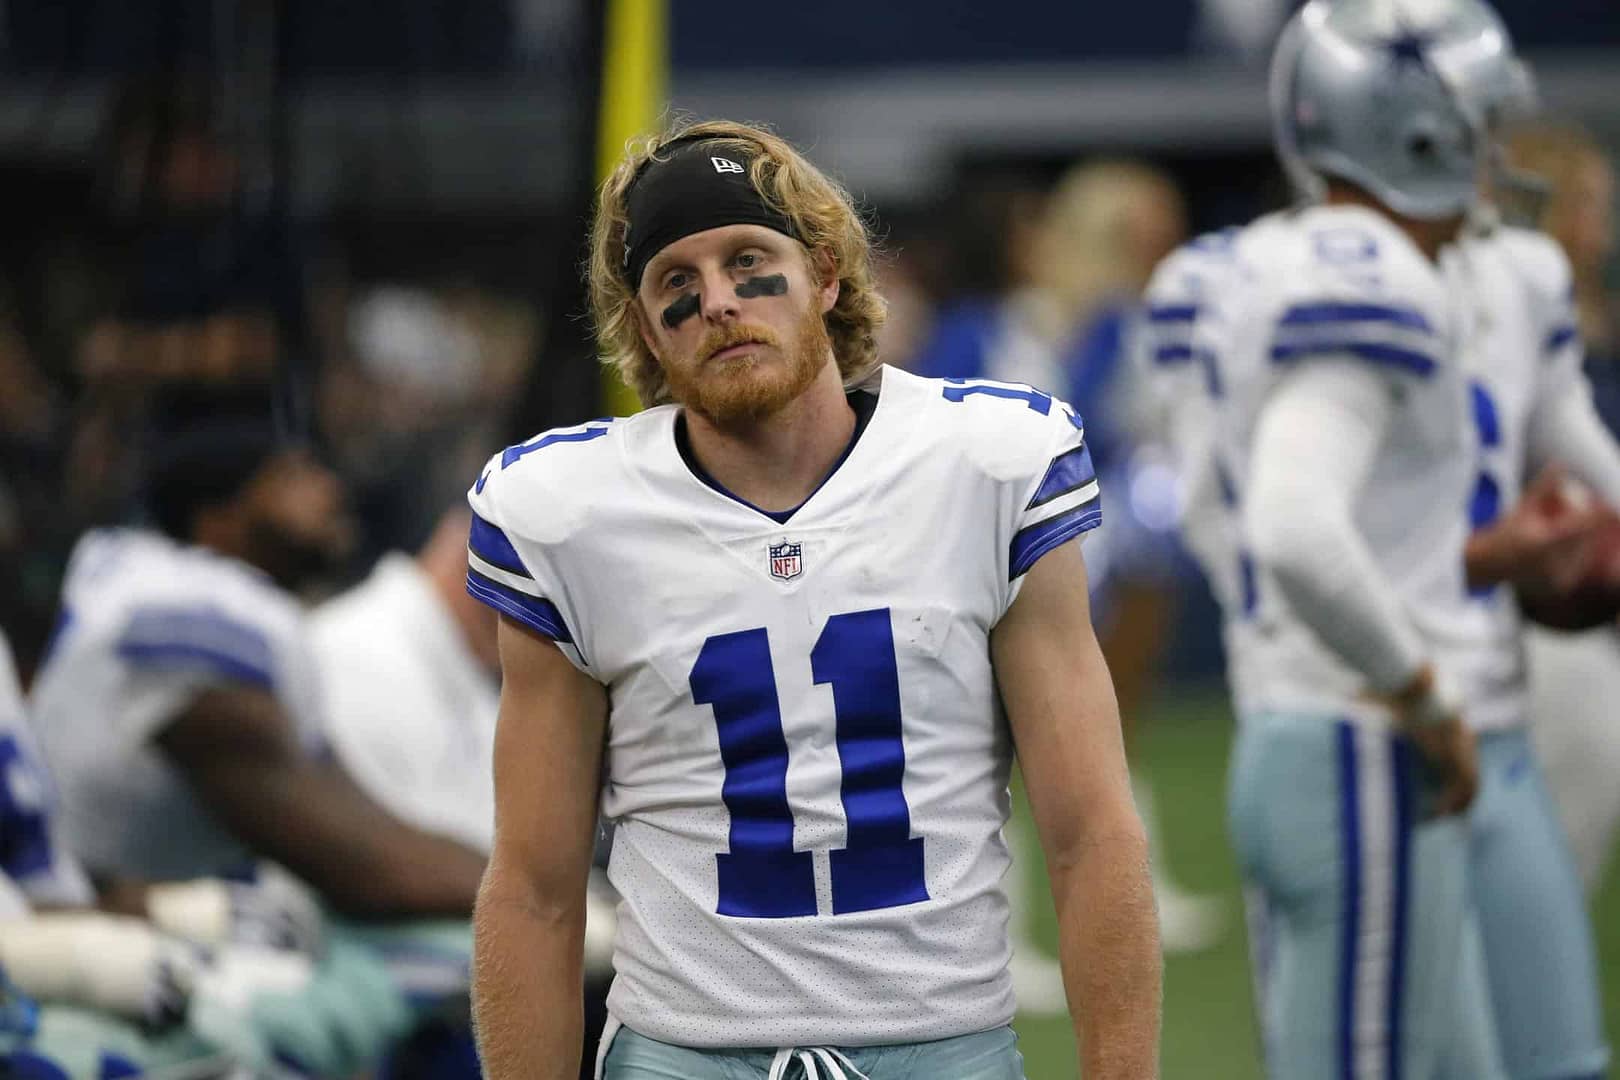 Fantasy Football Week 3 Waiver Wire: Does Cole Beasley Have Any